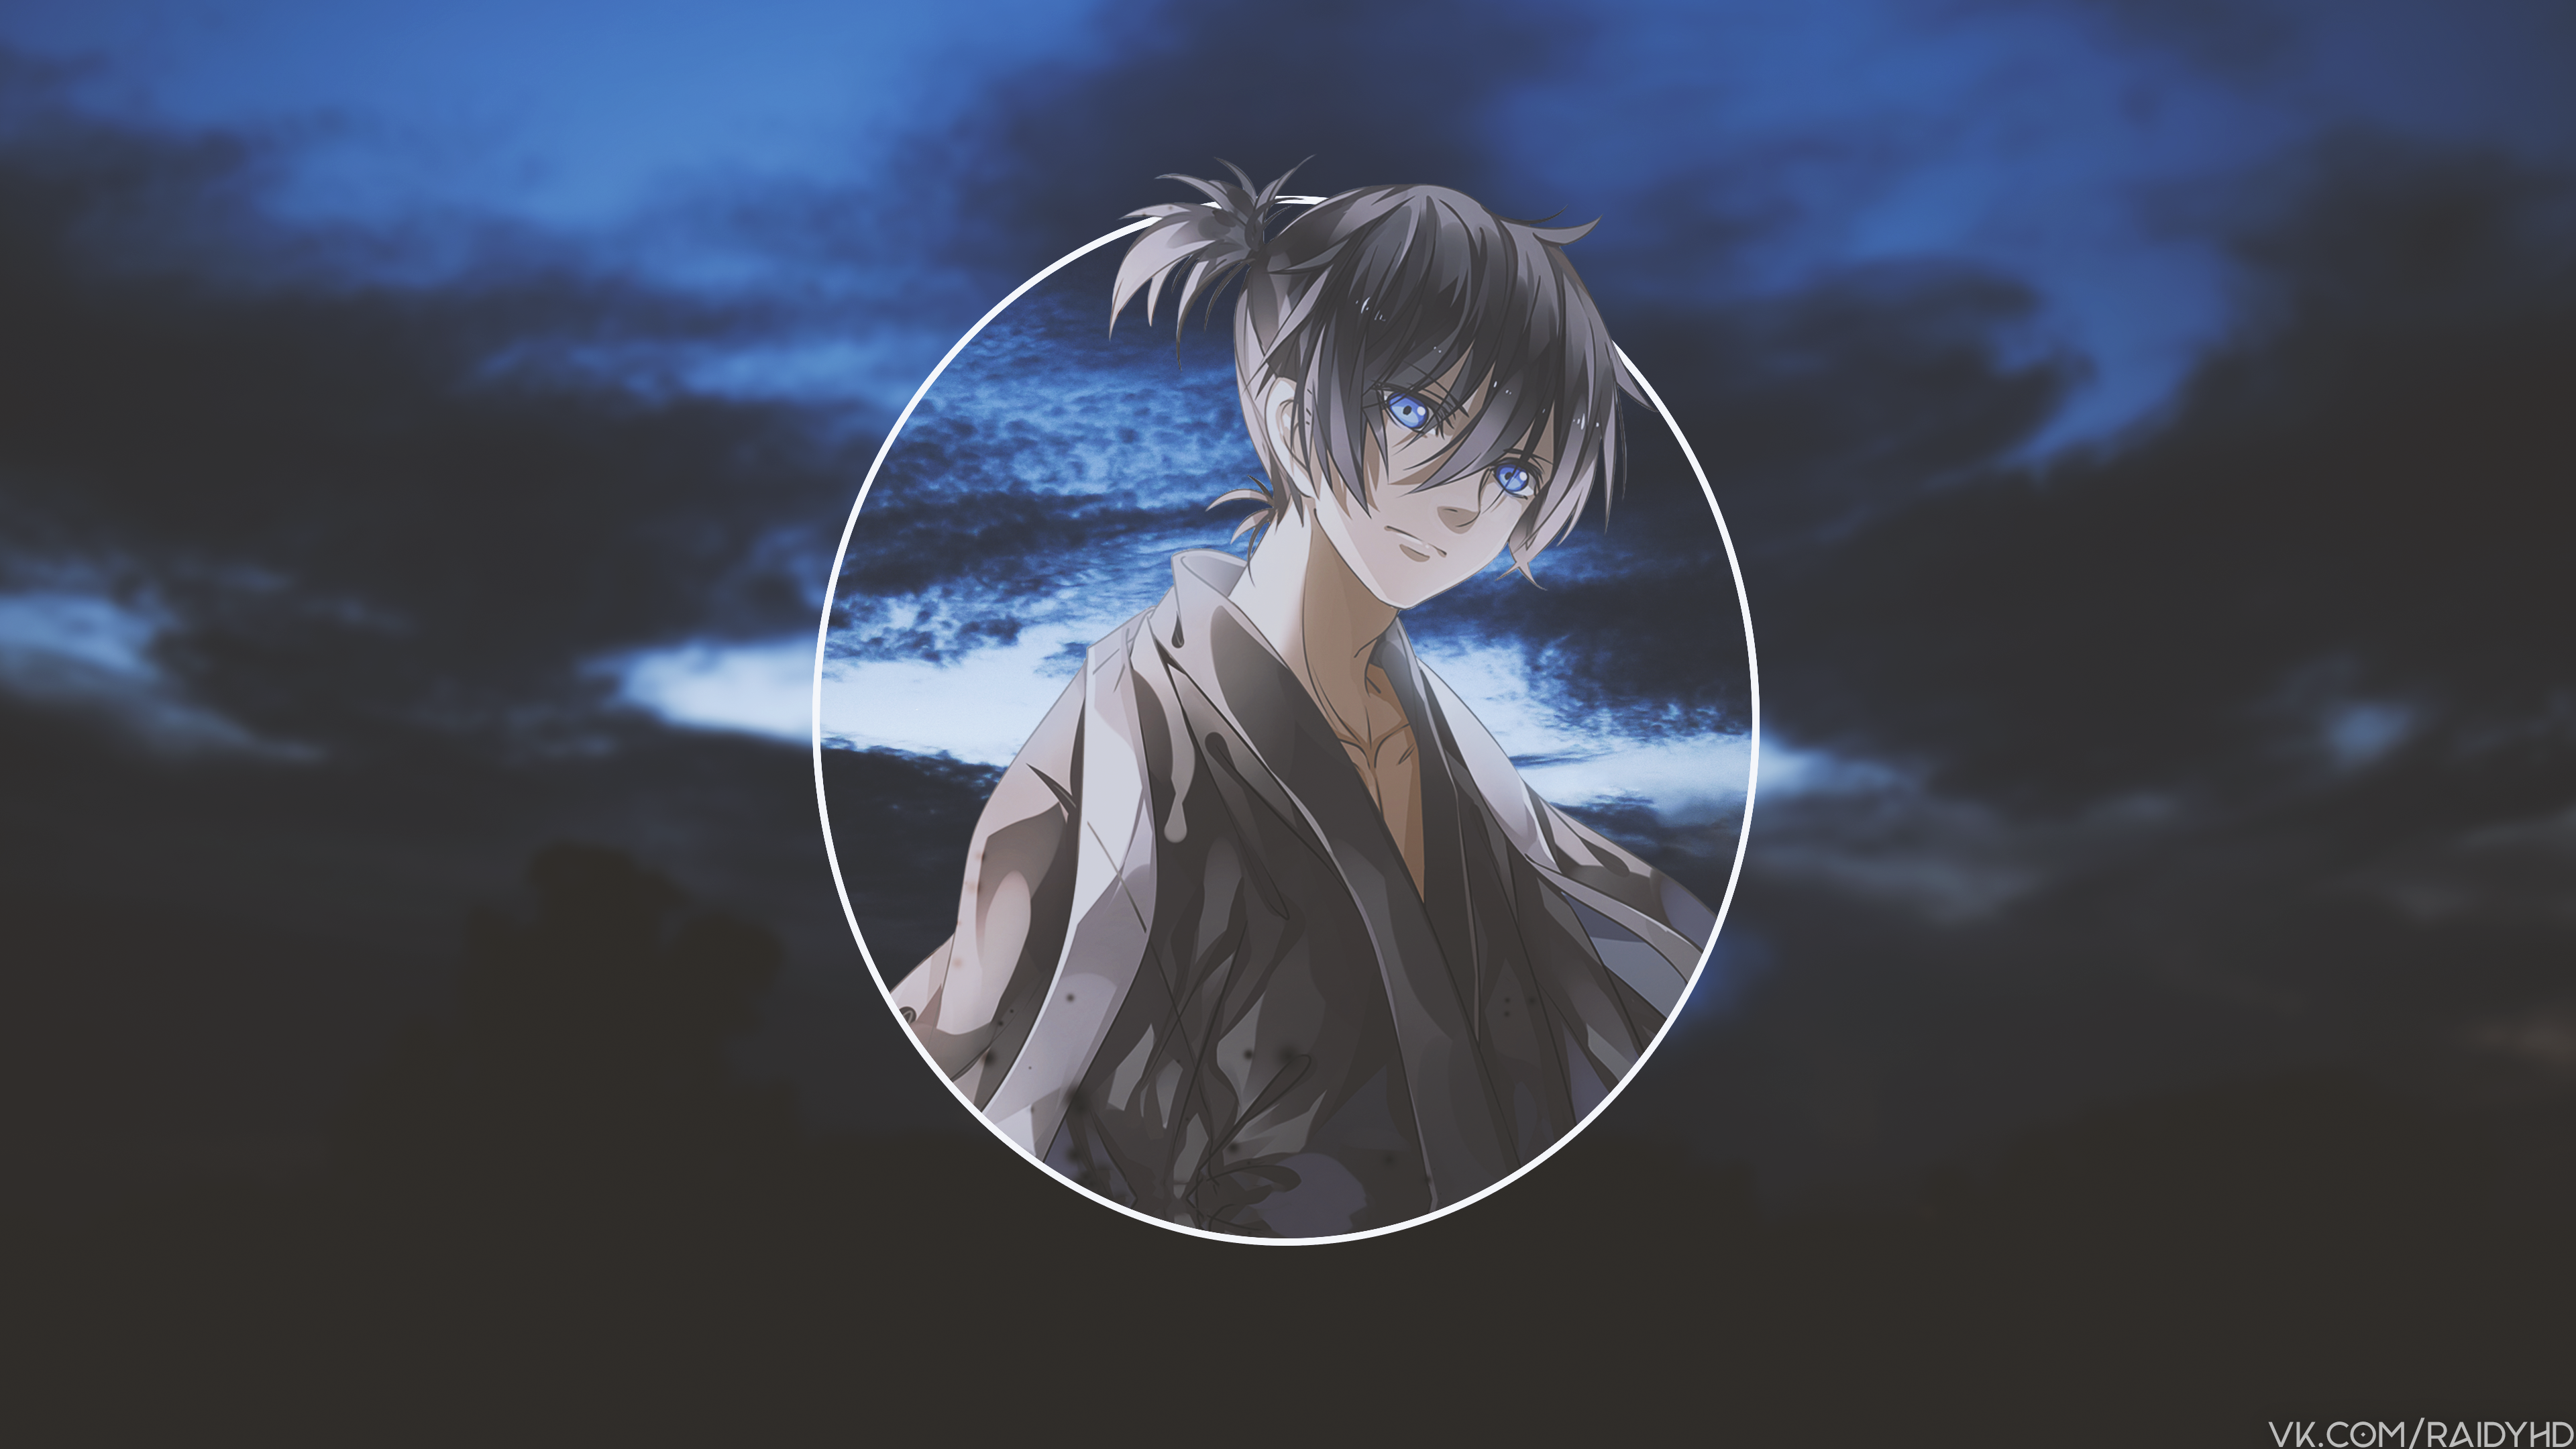 Anime 3840x2160 anime anime boys picture-in-picture Yato (Noragami) sky